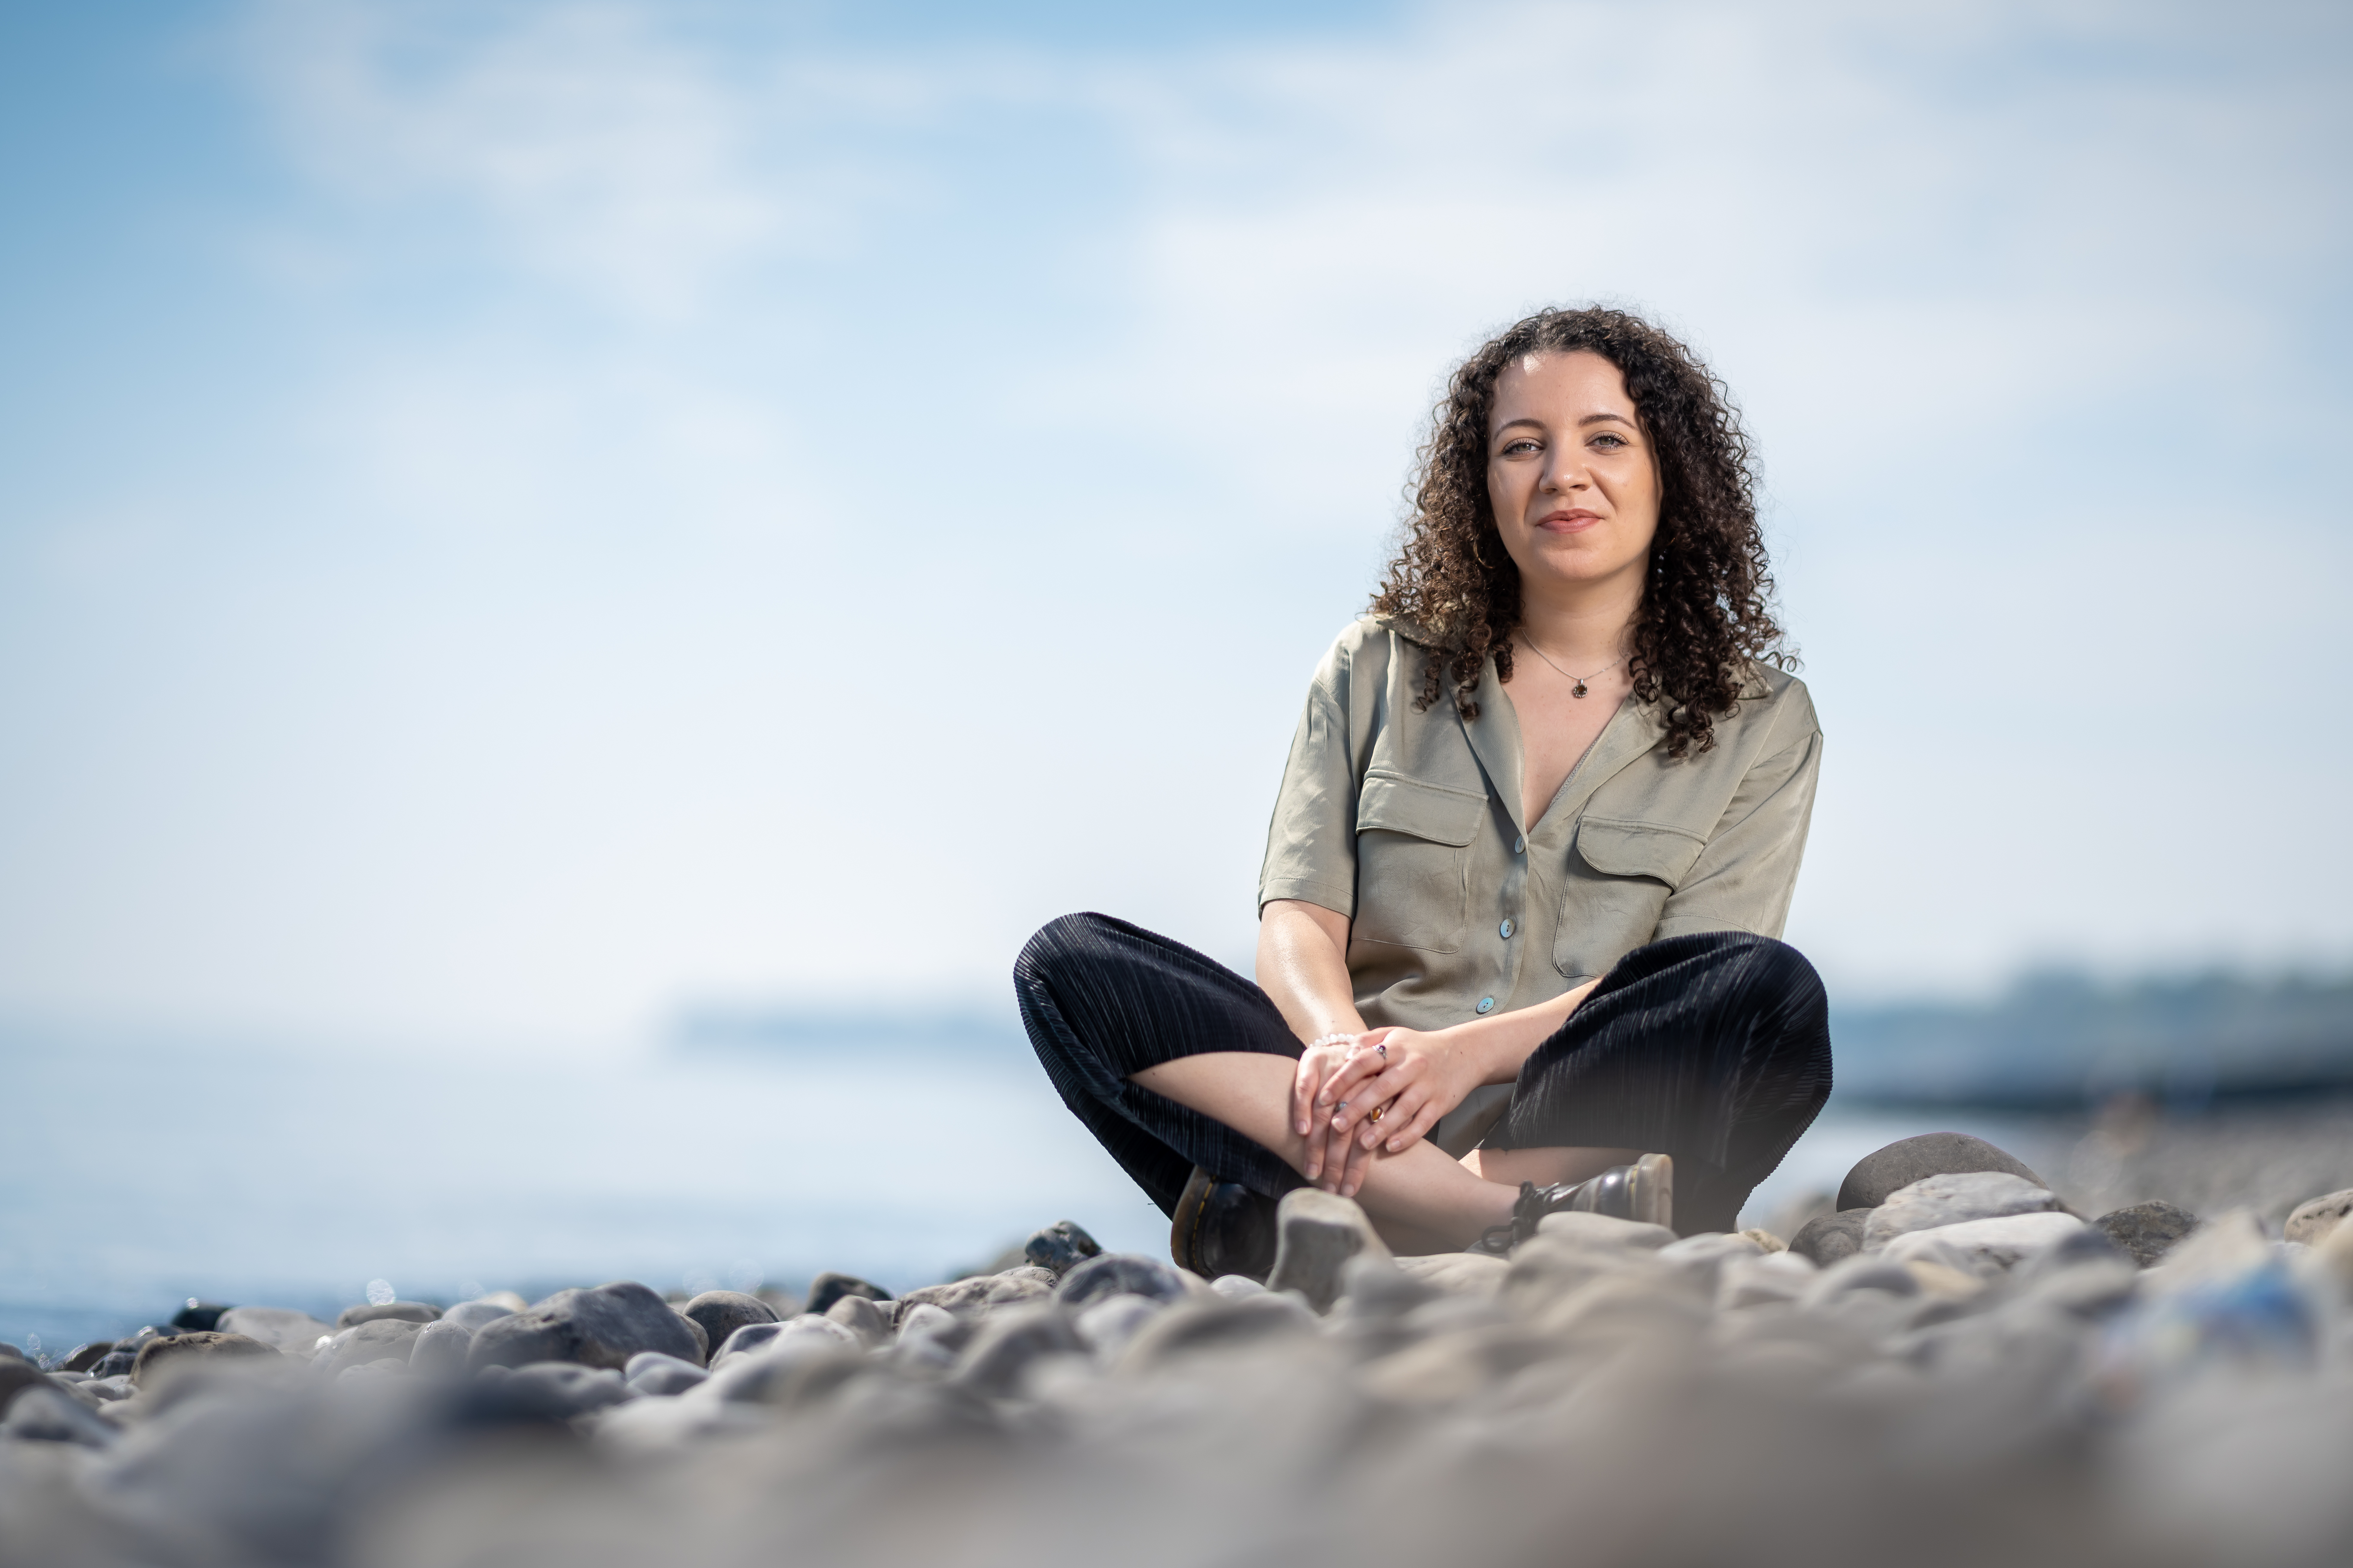 Image of the new poet in residence, sitting on a pebble beach and smiling. 